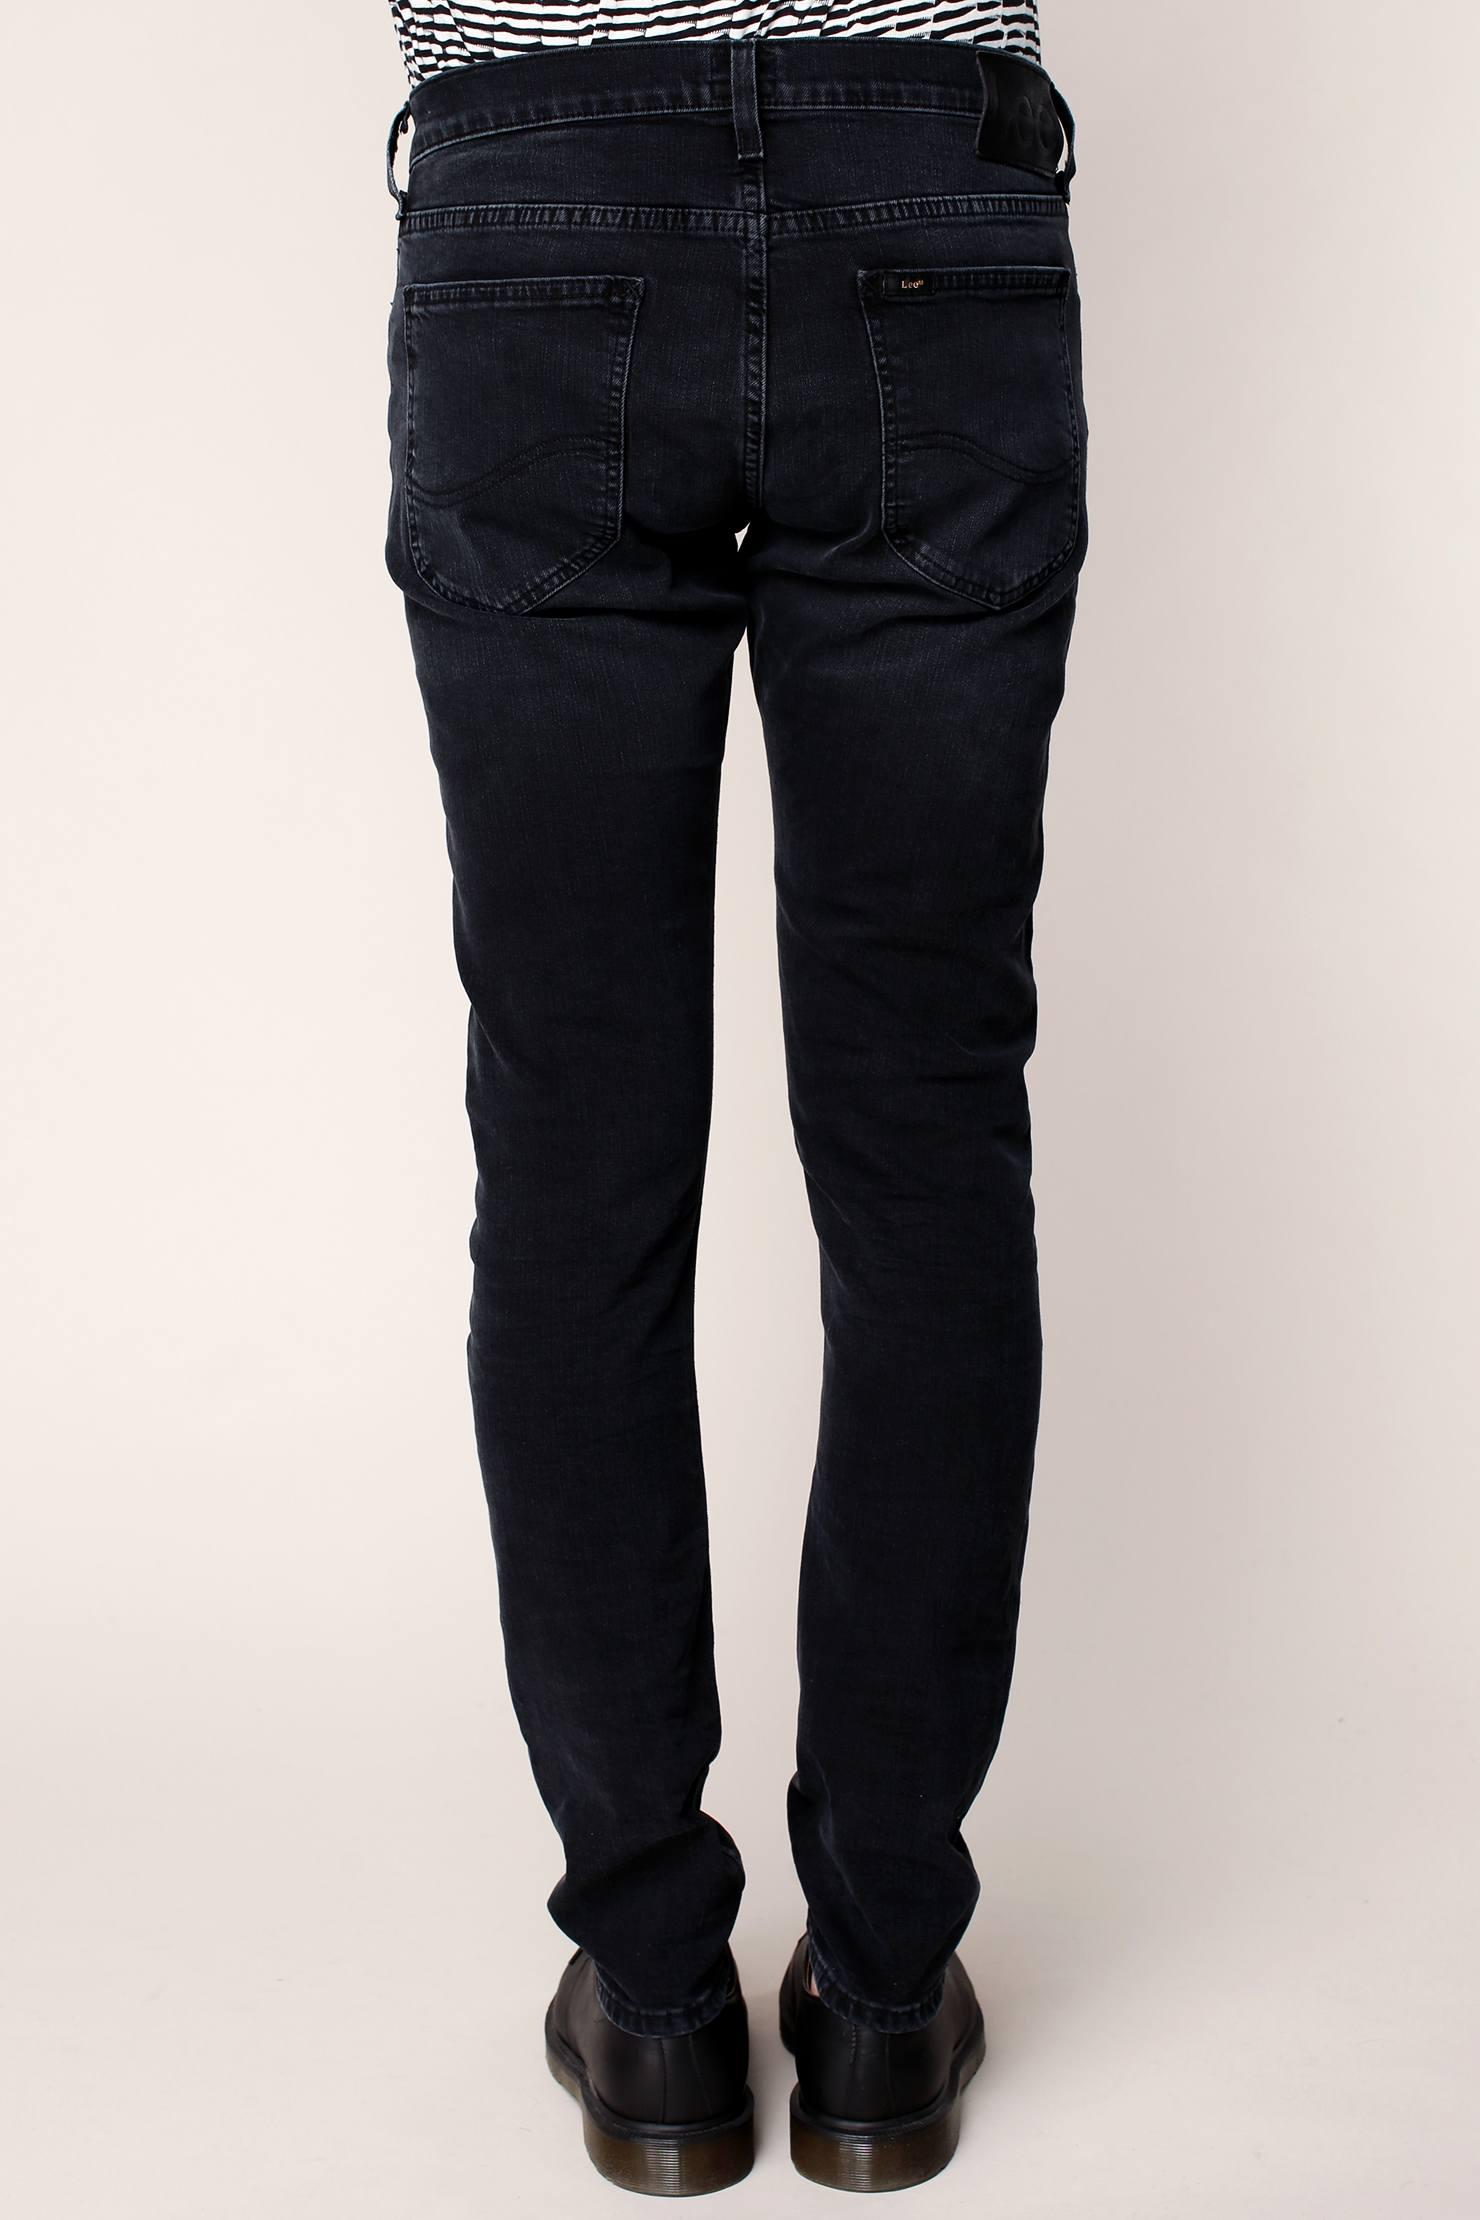 Lyst - Lee Jeans Jeans in Gray for Men